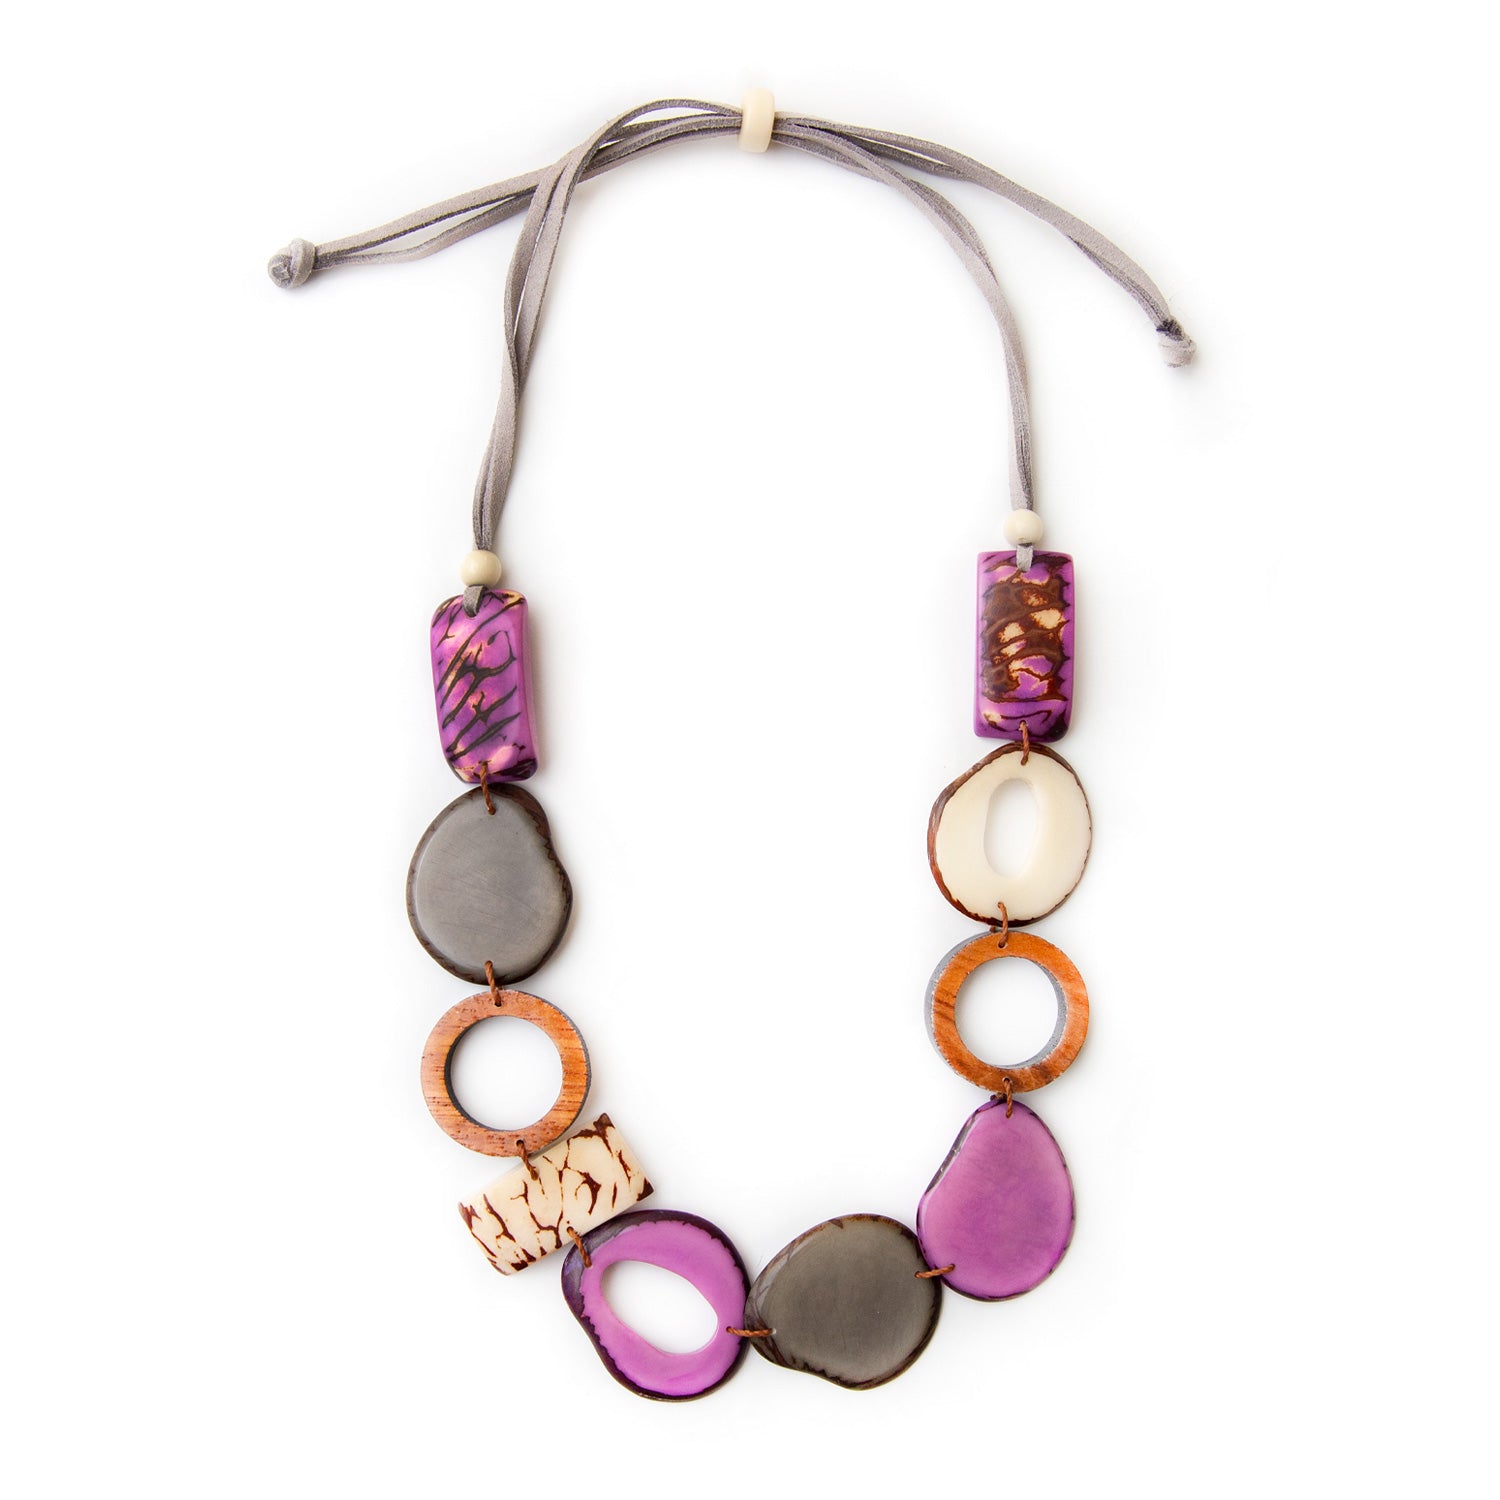 Tanya Necklace - Statement Tagua Nut Jewelry from Ecuador